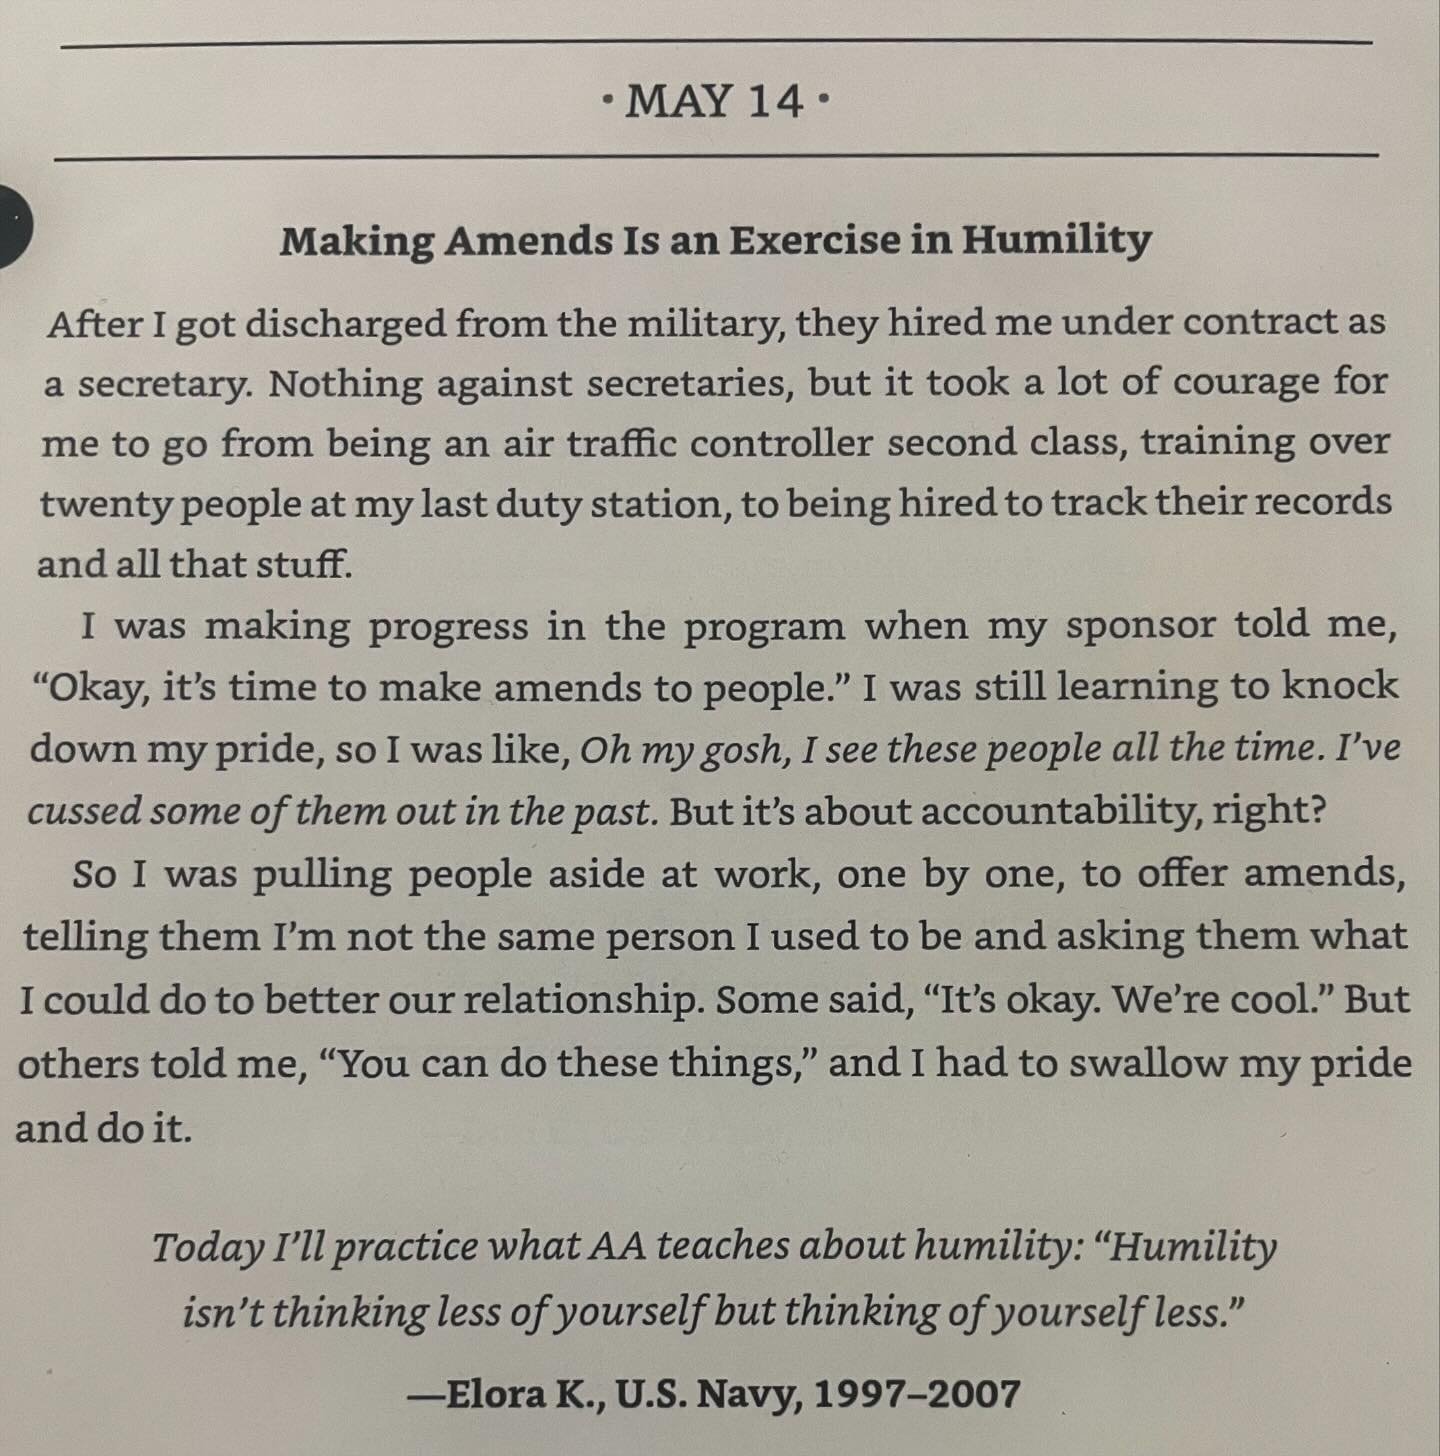 Good morning Warriors! Here is your daily reflection from &ldquo;Leave No One Behind&rdquo; 🇺🇸

&ldquo;Humility isn&rsquo;t thinking less of yourself but thinking of yourself less.&rdquo;